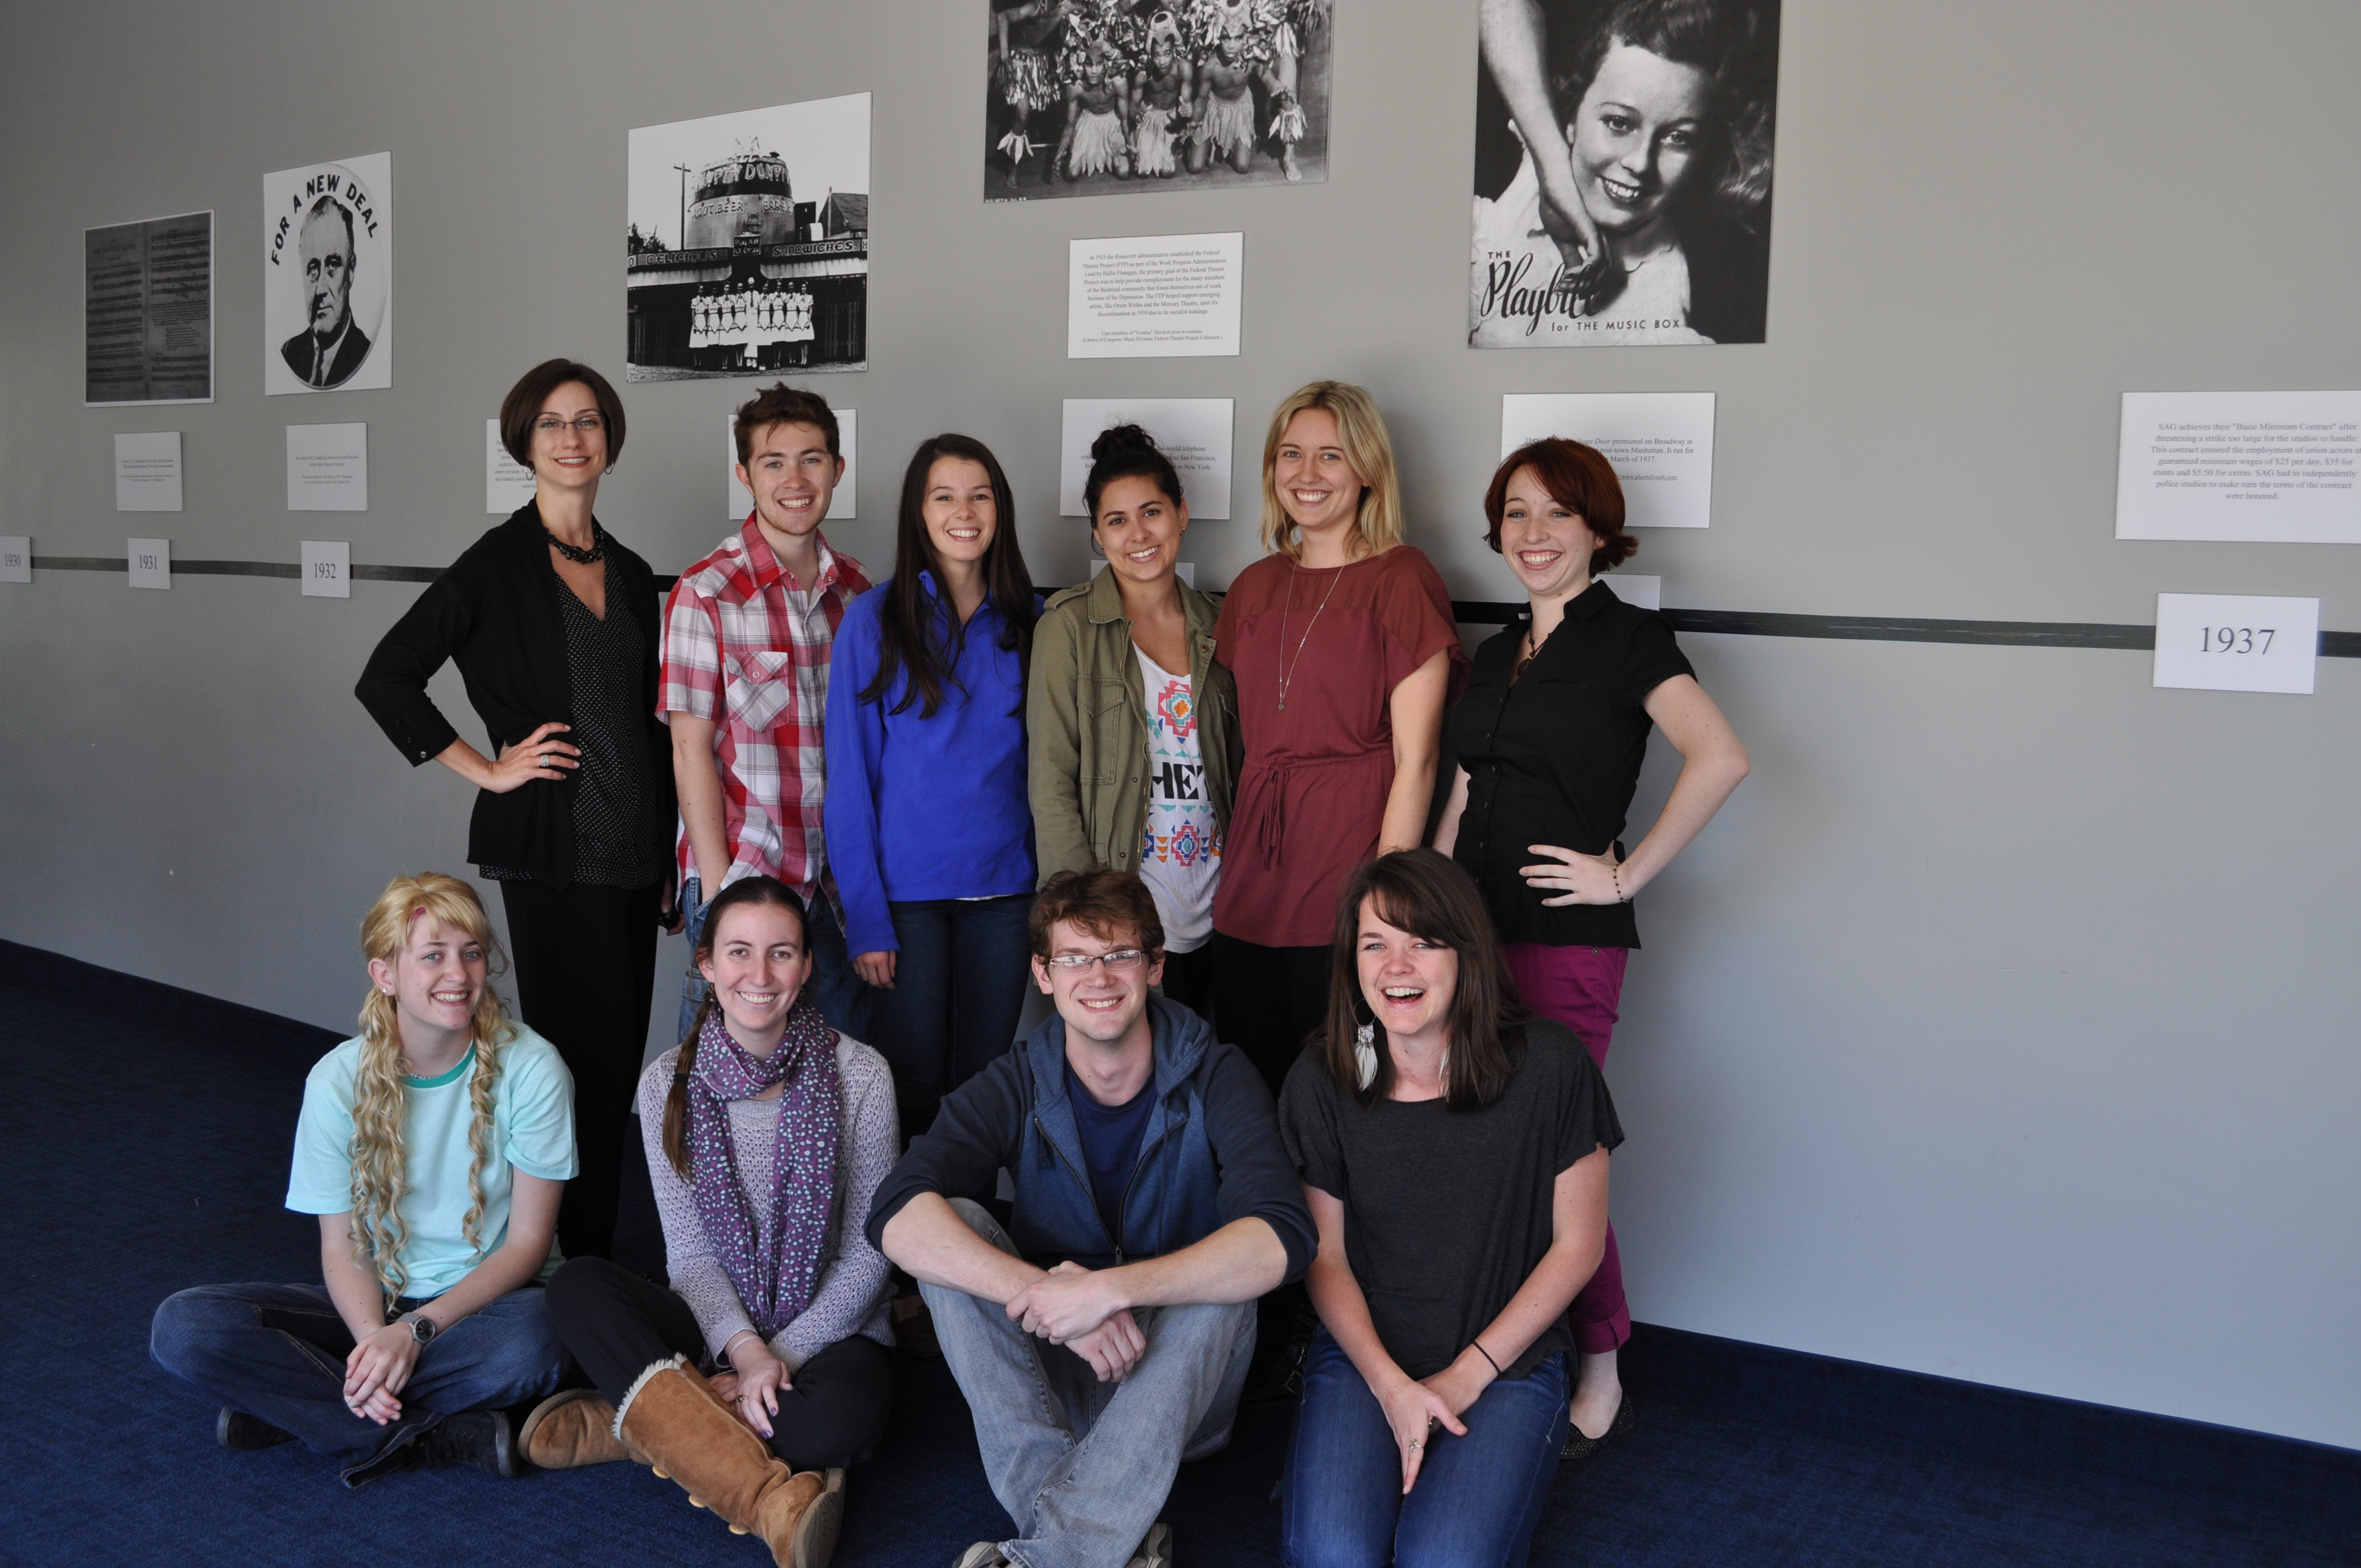 Audiences attending "Stage Door" will be greeted by a lobby display timeline created by the dramaturgy class taught by Jocelyn L. Buckner, Ph.D., assistant professor. Pictured are, back row, left to right, Professor Buckner, Peyton Ashby, Jessica Mason, Gabbie Boyadjian, Britt Keller and Robyn Mack. Front row, left to right, are Brynn Nelson, Isabelle Grimm, Colby Sostarich, Jenna Selby.